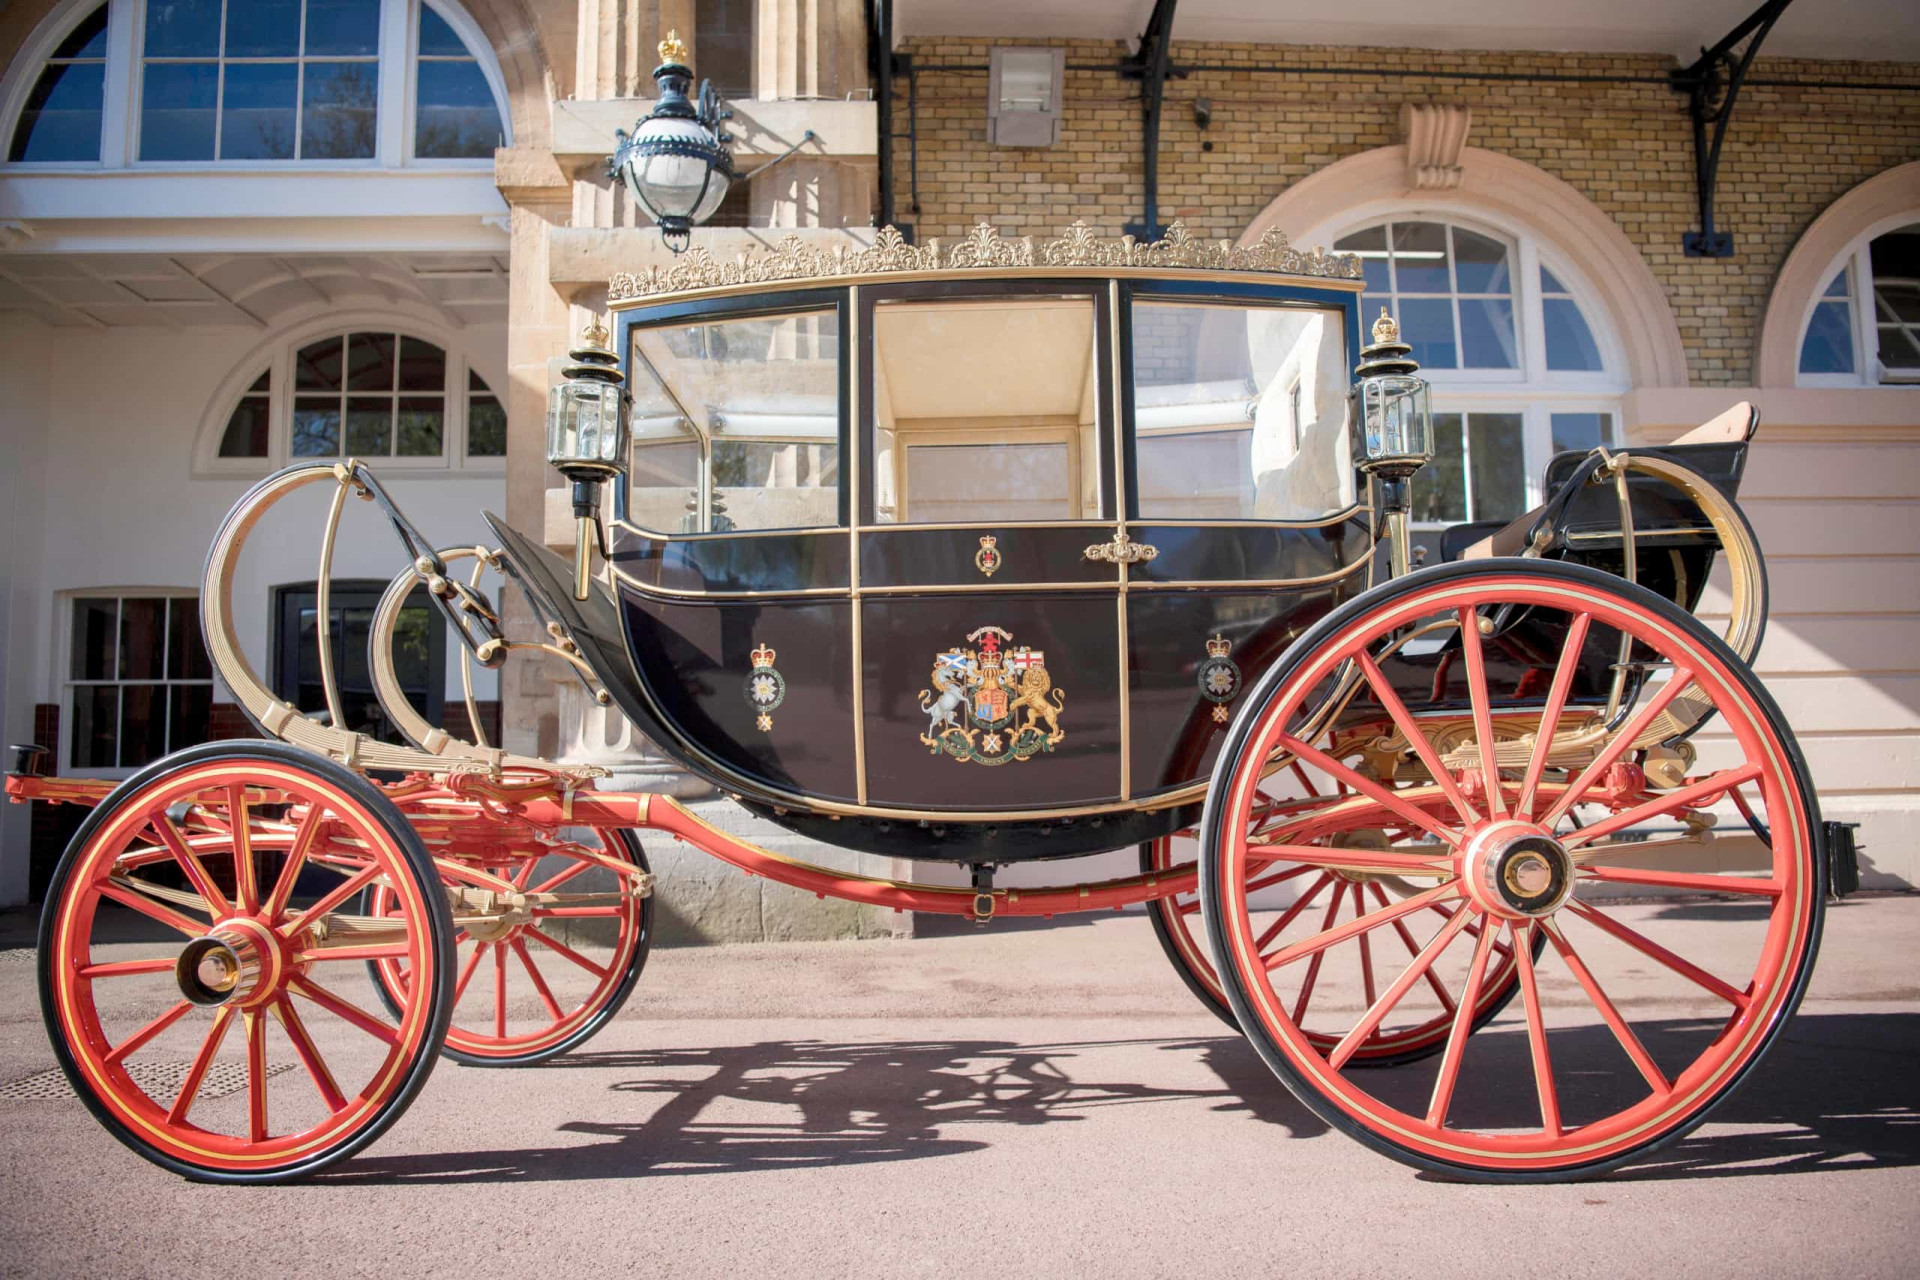 <p>The Scottish State Coach was built in 1830 for the Duke of Cambridge to attend the coronation of William IV. It was used for the first time by Queen Elizabeth II in 1969. In 2011, it was employed to chauffeur the Queen and the Duke of Edinburgh at the wedding of Prince William and Catherine Middleton.</p><p>You may also like:<a href="https://www.starsinsider.com/n/337968?utm_source=msn.com&utm_medium=display&utm_campaign=referral_description&utm_content=516219v1en-us"> Creepy! Celebrities who have doppelgängers from the past</a></p>